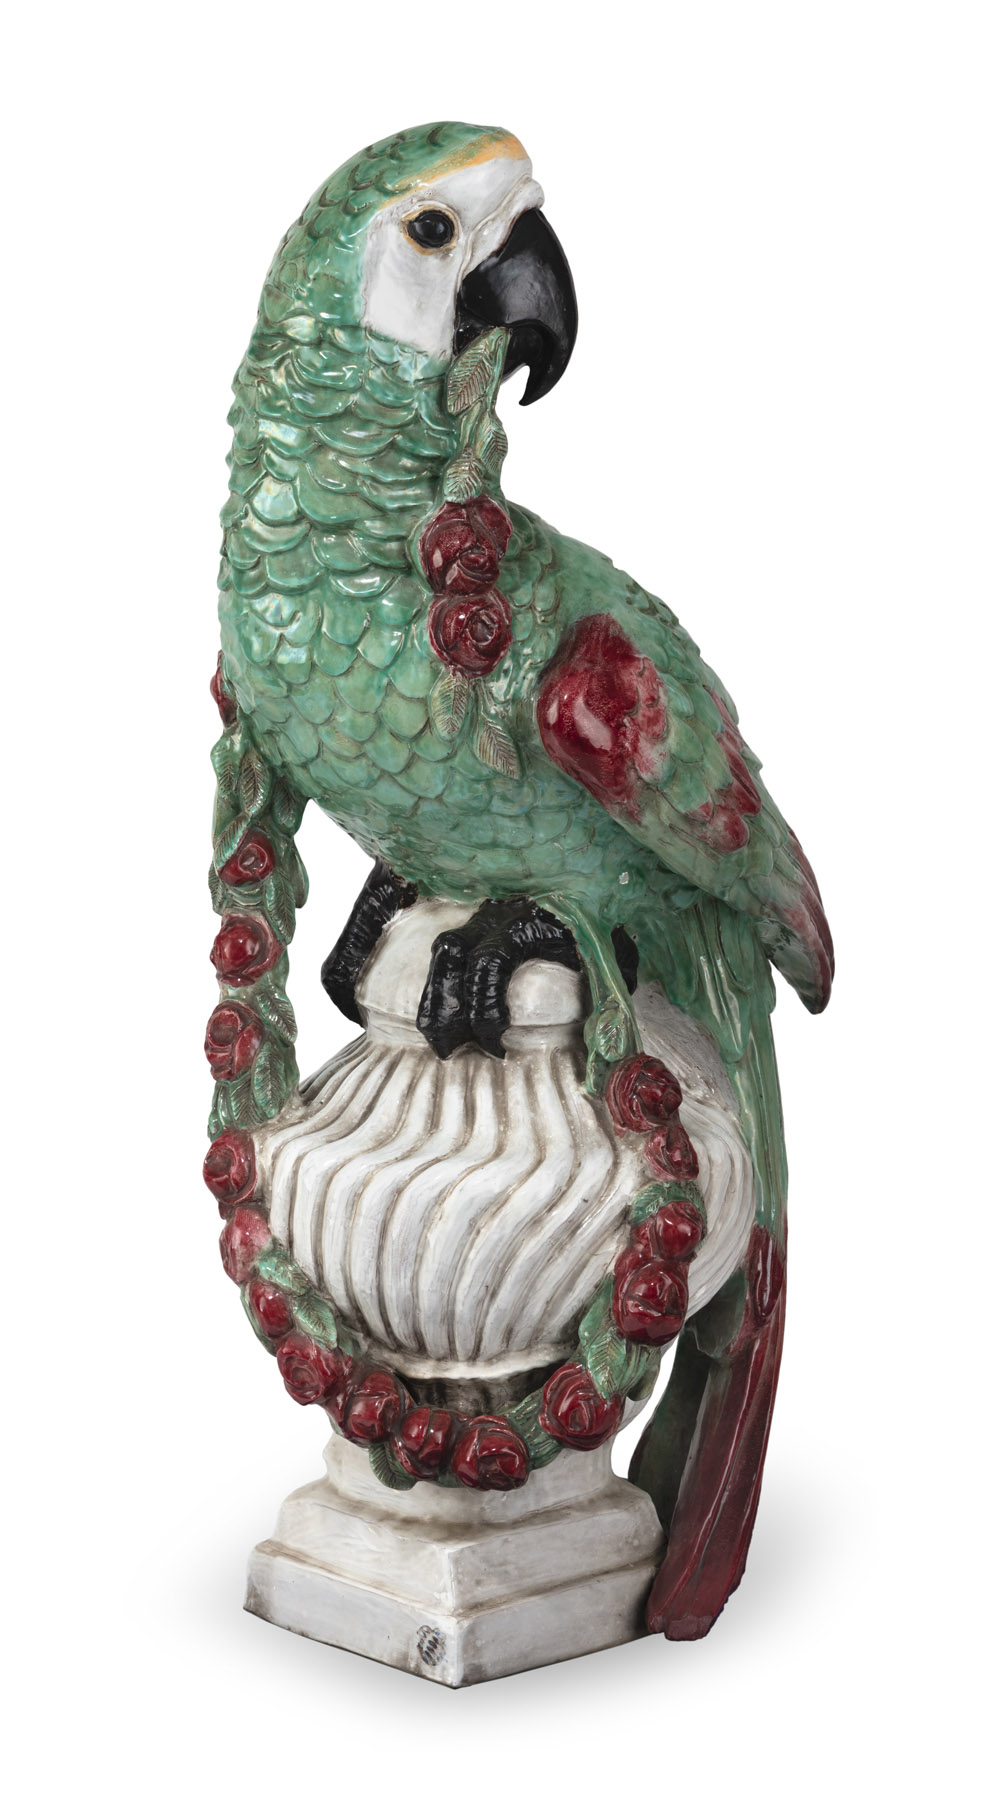 A LARGE NYMPHENBURG MAIOLICA FIGURE OF A MACAW WITH GARLAND